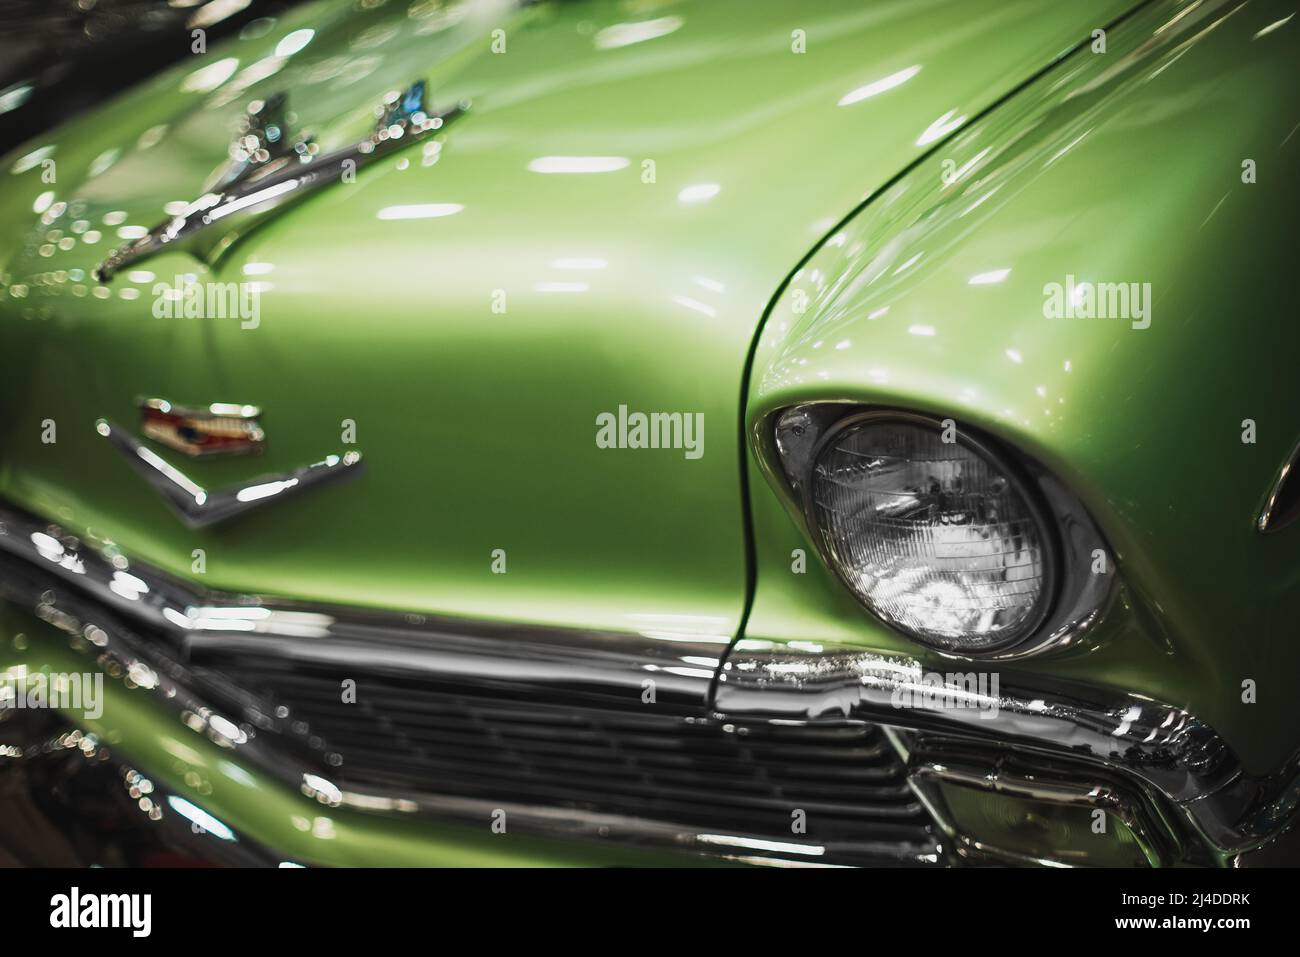 Izmir, Turkey - December 4, 2021: Close up shot of a green colored Chevrolet brand classic cars headlight at the exhibition of classic cars Izmir fair Stock Photo